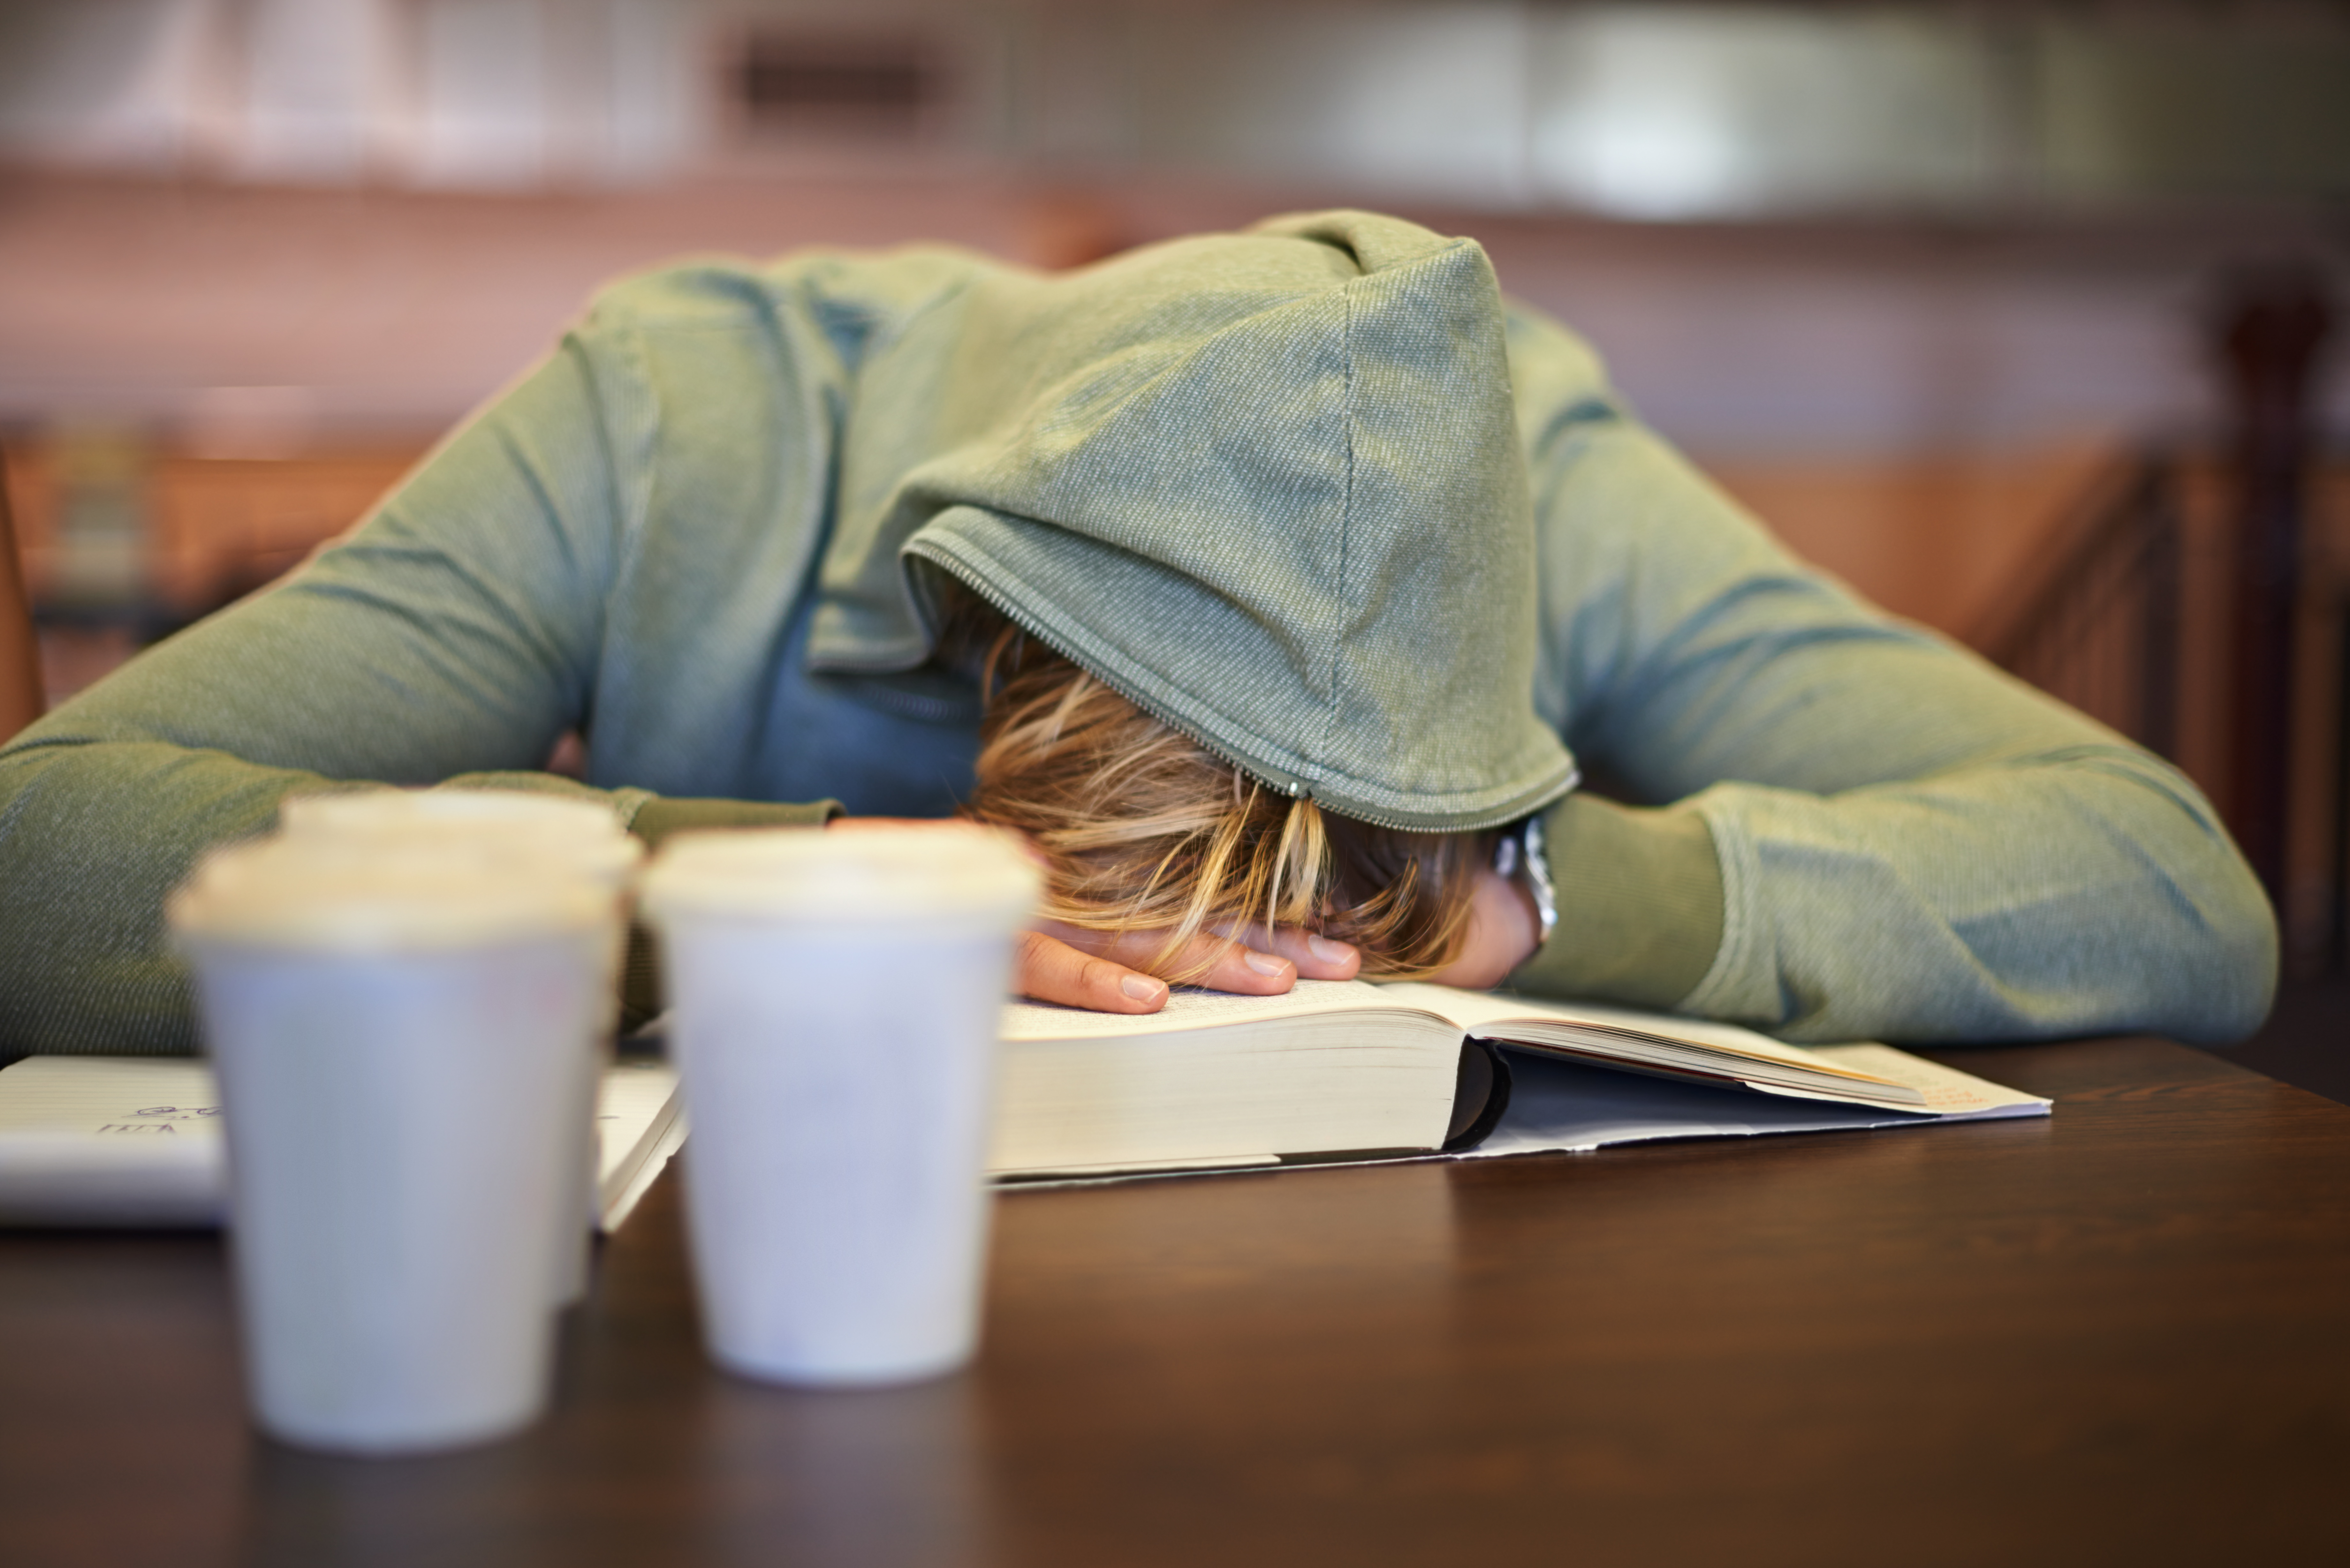 A young student asleep at school. (Getty Images)